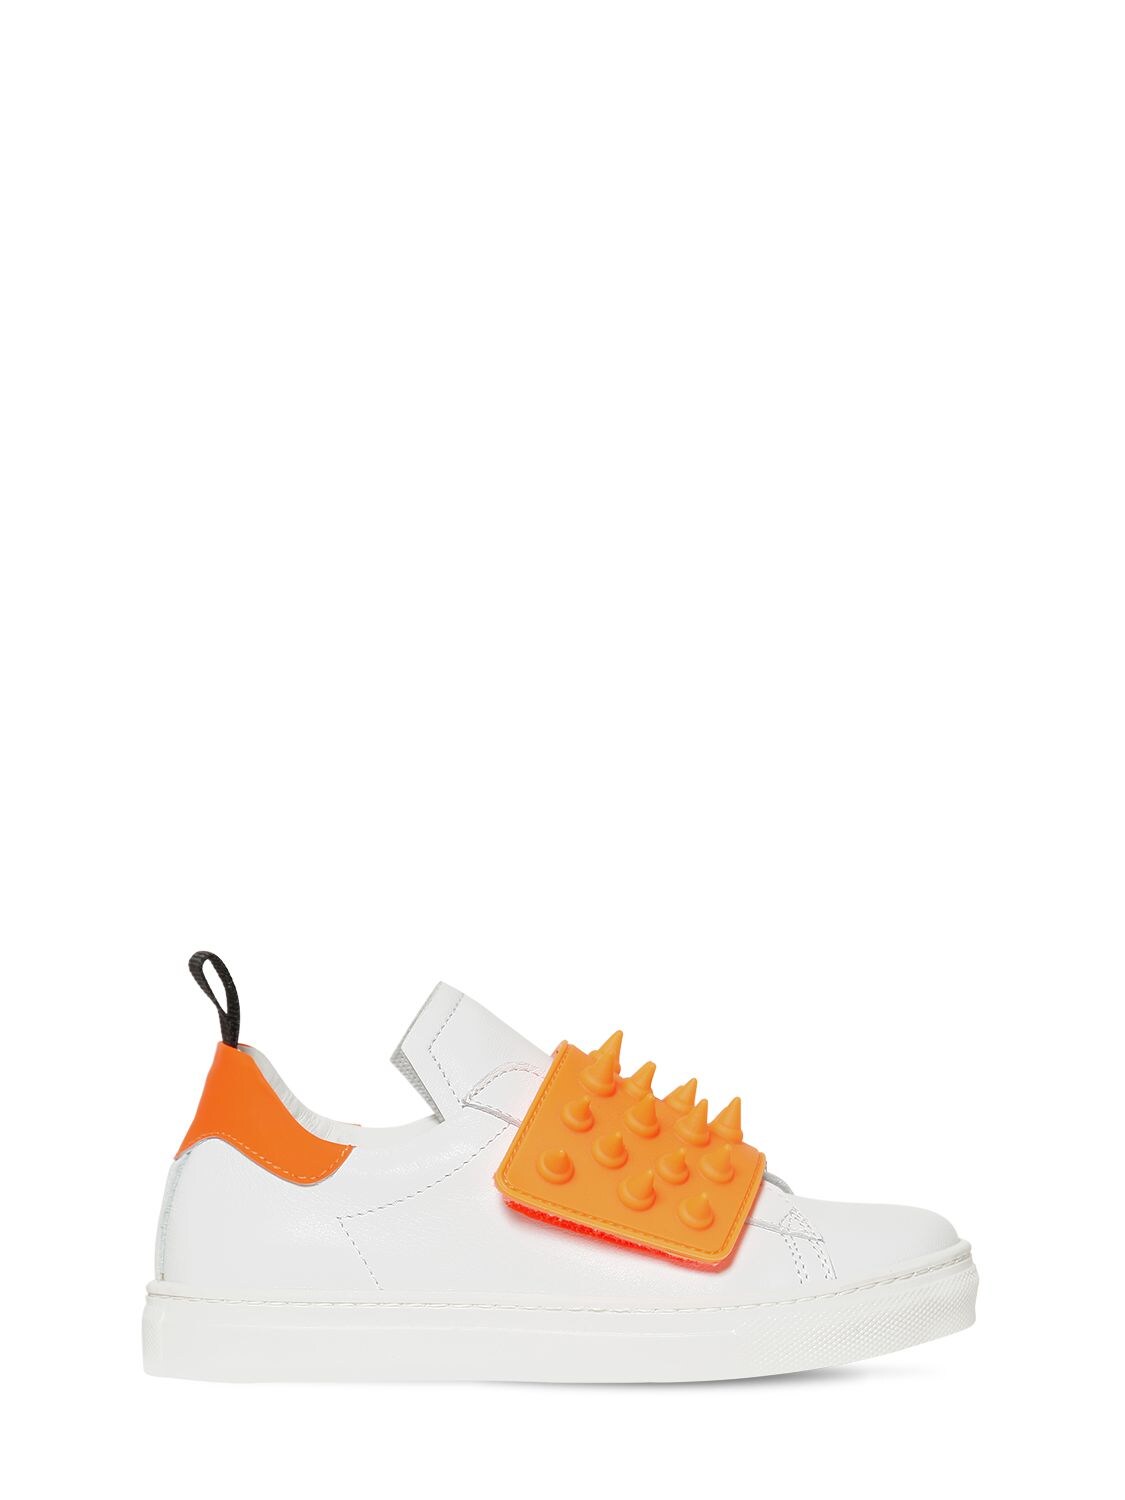 Am 66 Kids' Spiked Two Tone Leather Trainers In White,orange